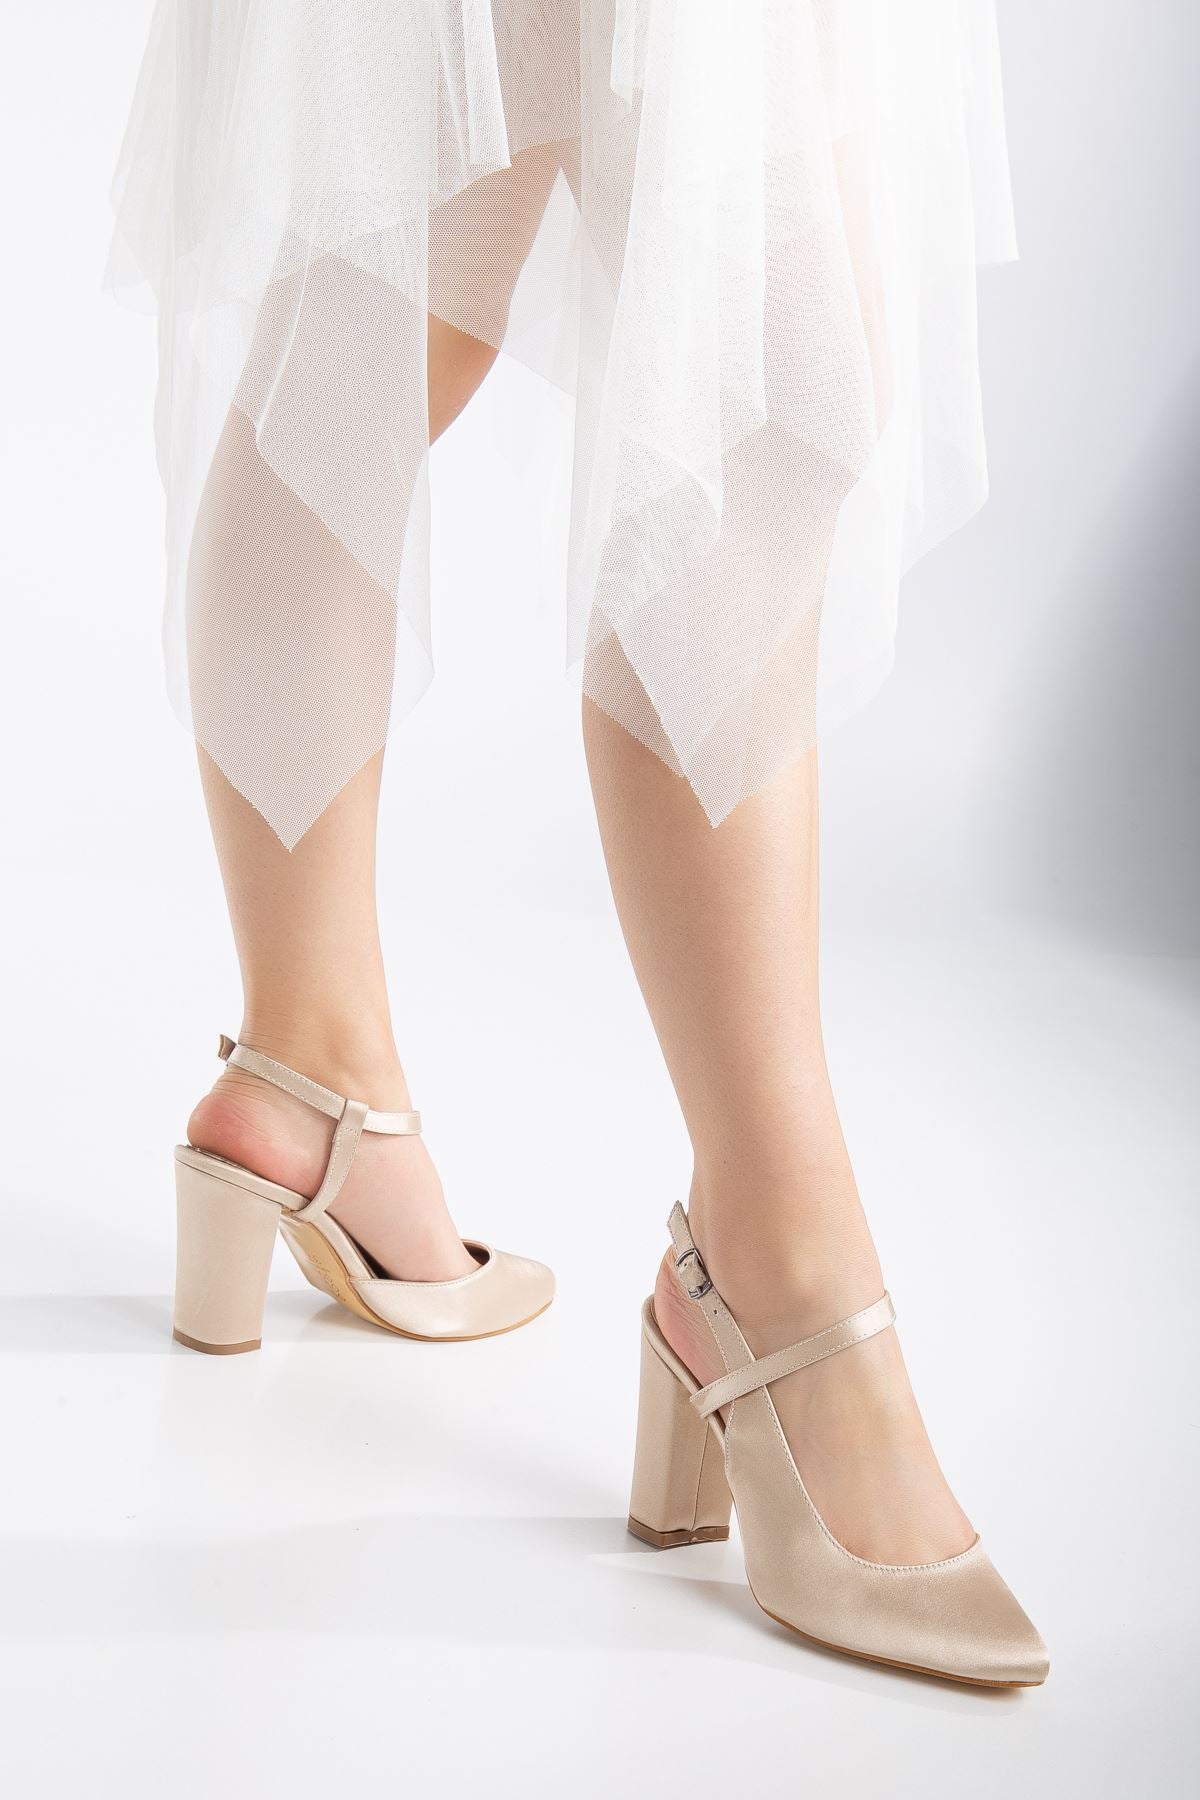 Lotus Cream Satin Ankle Strap Heeled Women's Shoes - STREETMODE™